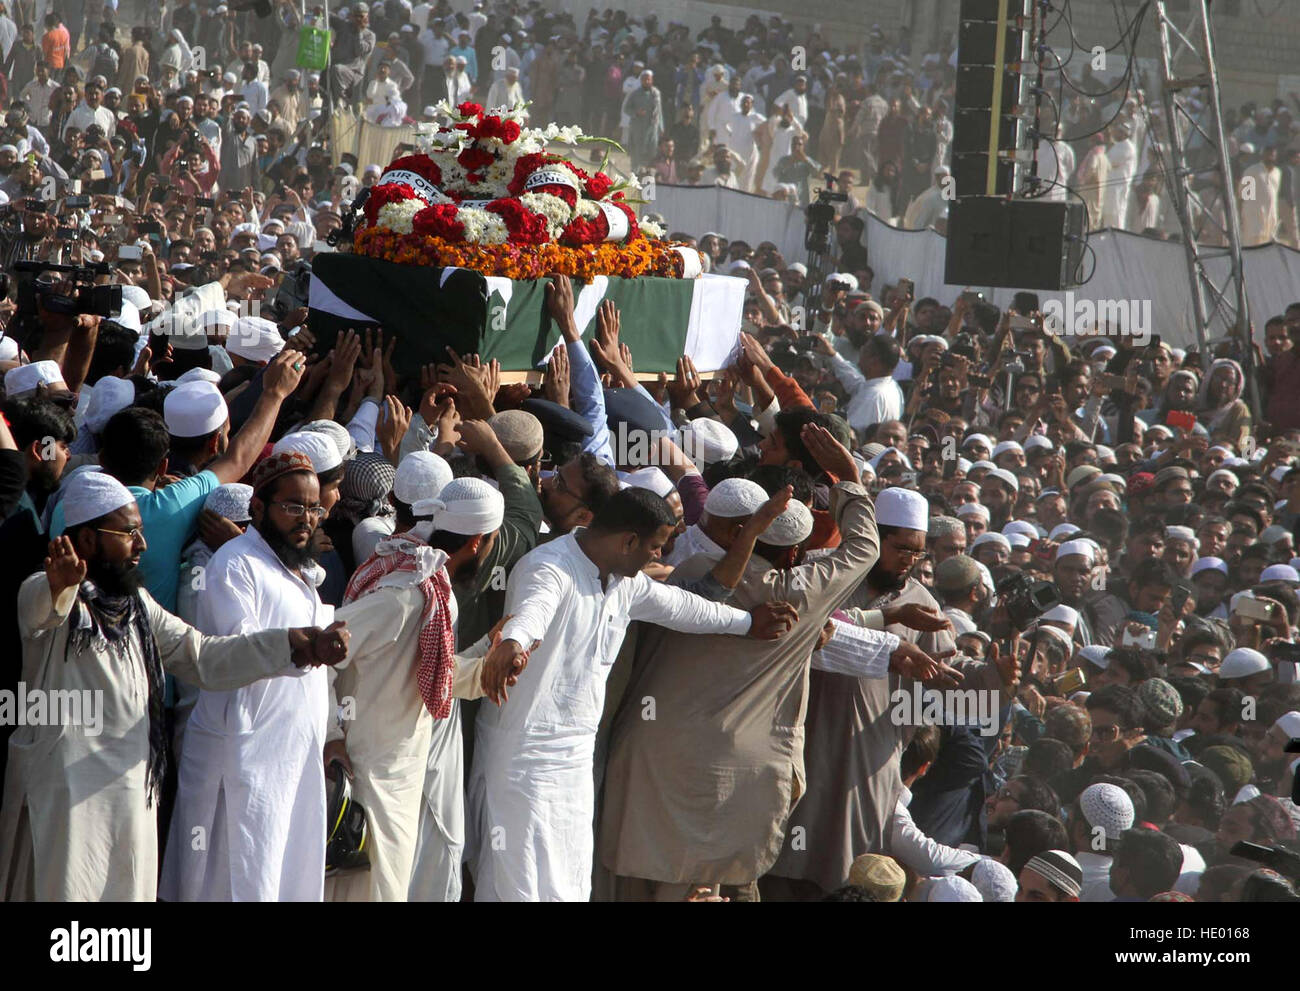 Karachi, Pakistan. 15th Dec, 2016. People attend the funeral of Junaid Jamshed, a Pakistani pop singer turned Islamic preacher, in Karachi, southern Pakistan, on Dec. 15, 2016. Thousands of people attended the funeral prayers for Jashmed, who died in the Dec. 7 plane crash in Havelian. A passenger plane of Pakistan International Airlines with 48 people on board crashed in Pakistan's northwest Havelian area on Wednesday. No one survived the accident. © Xinhua/Alamy Live News Stock Photo